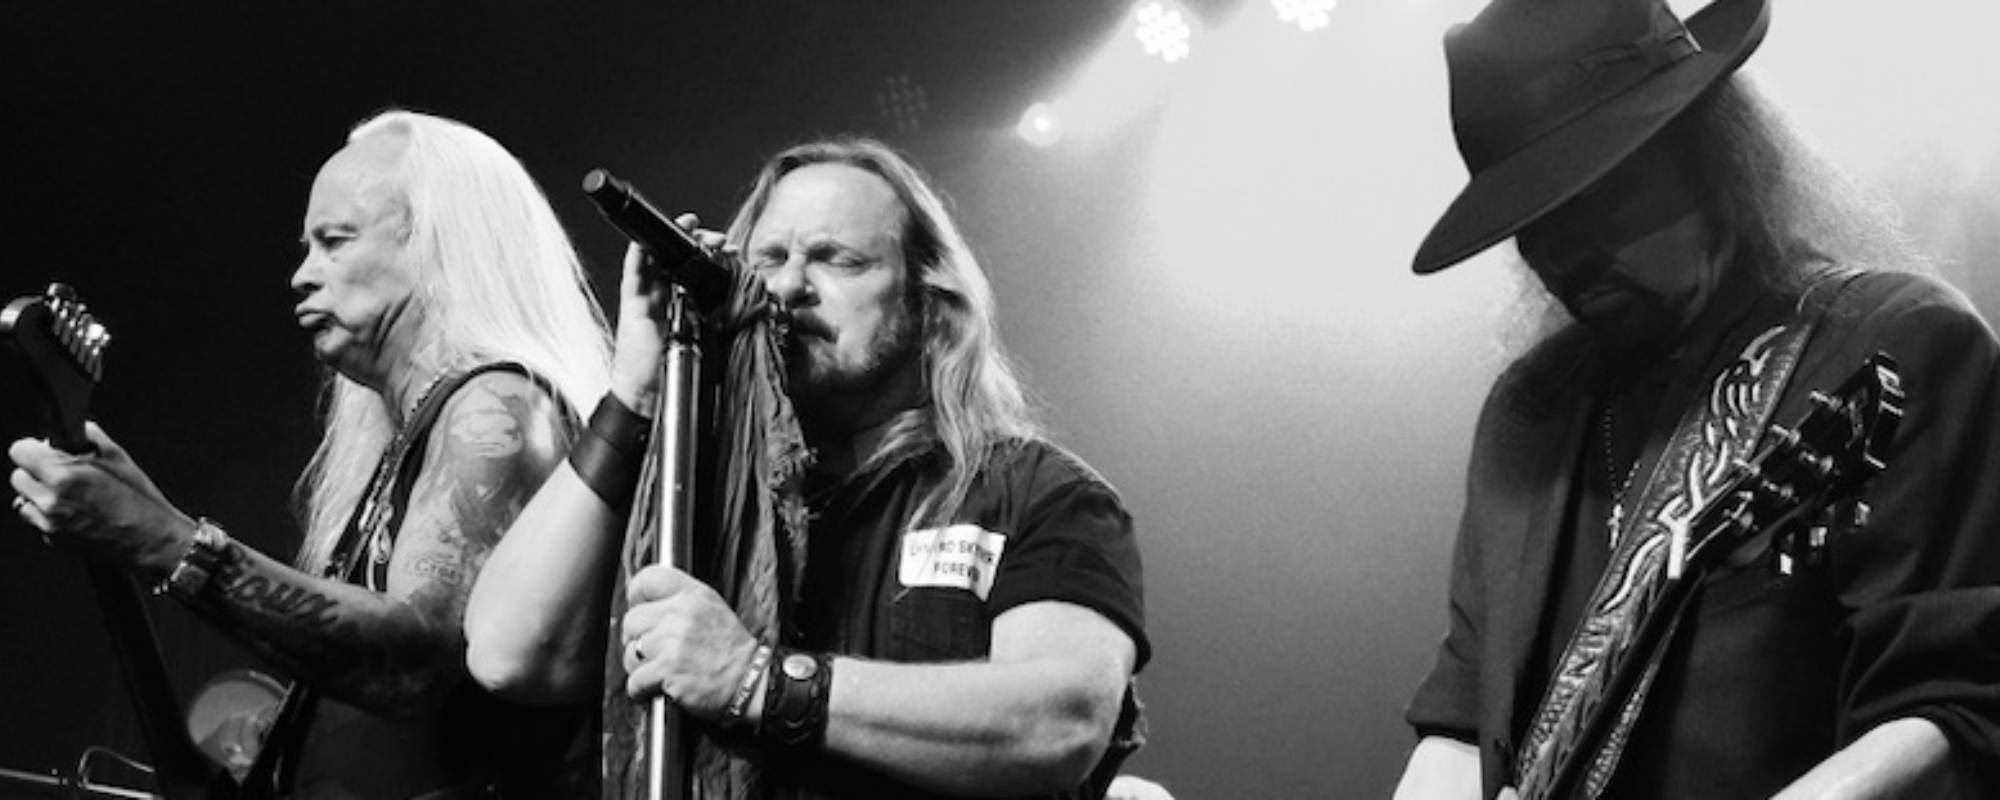 Exclusive: Lynyrd Skynyrd Teases “Great Surprises” at Nashville’s NYE Bash